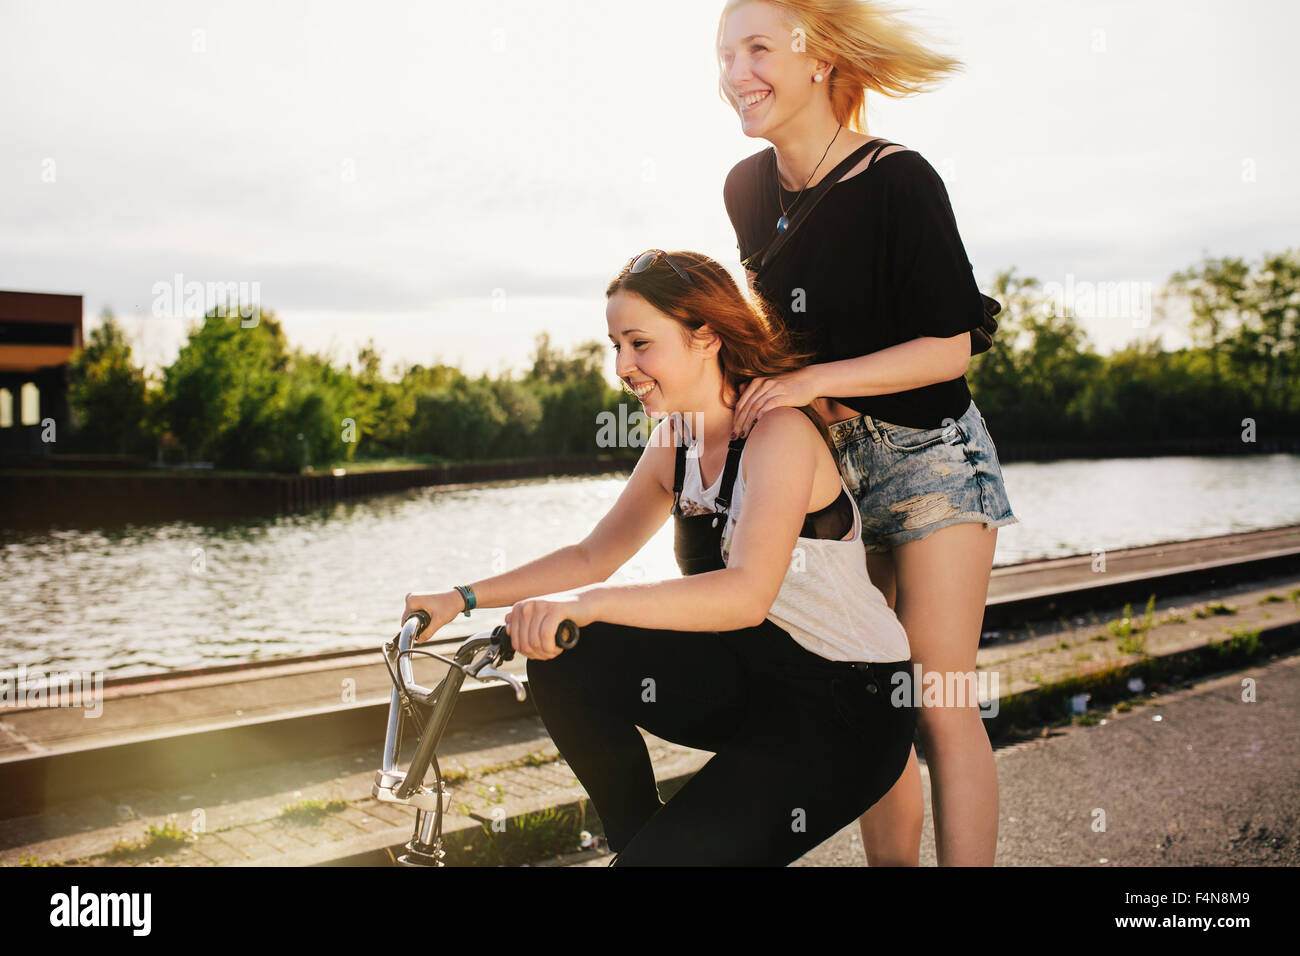 Two friends riding BMX bicycle together Stock Photo